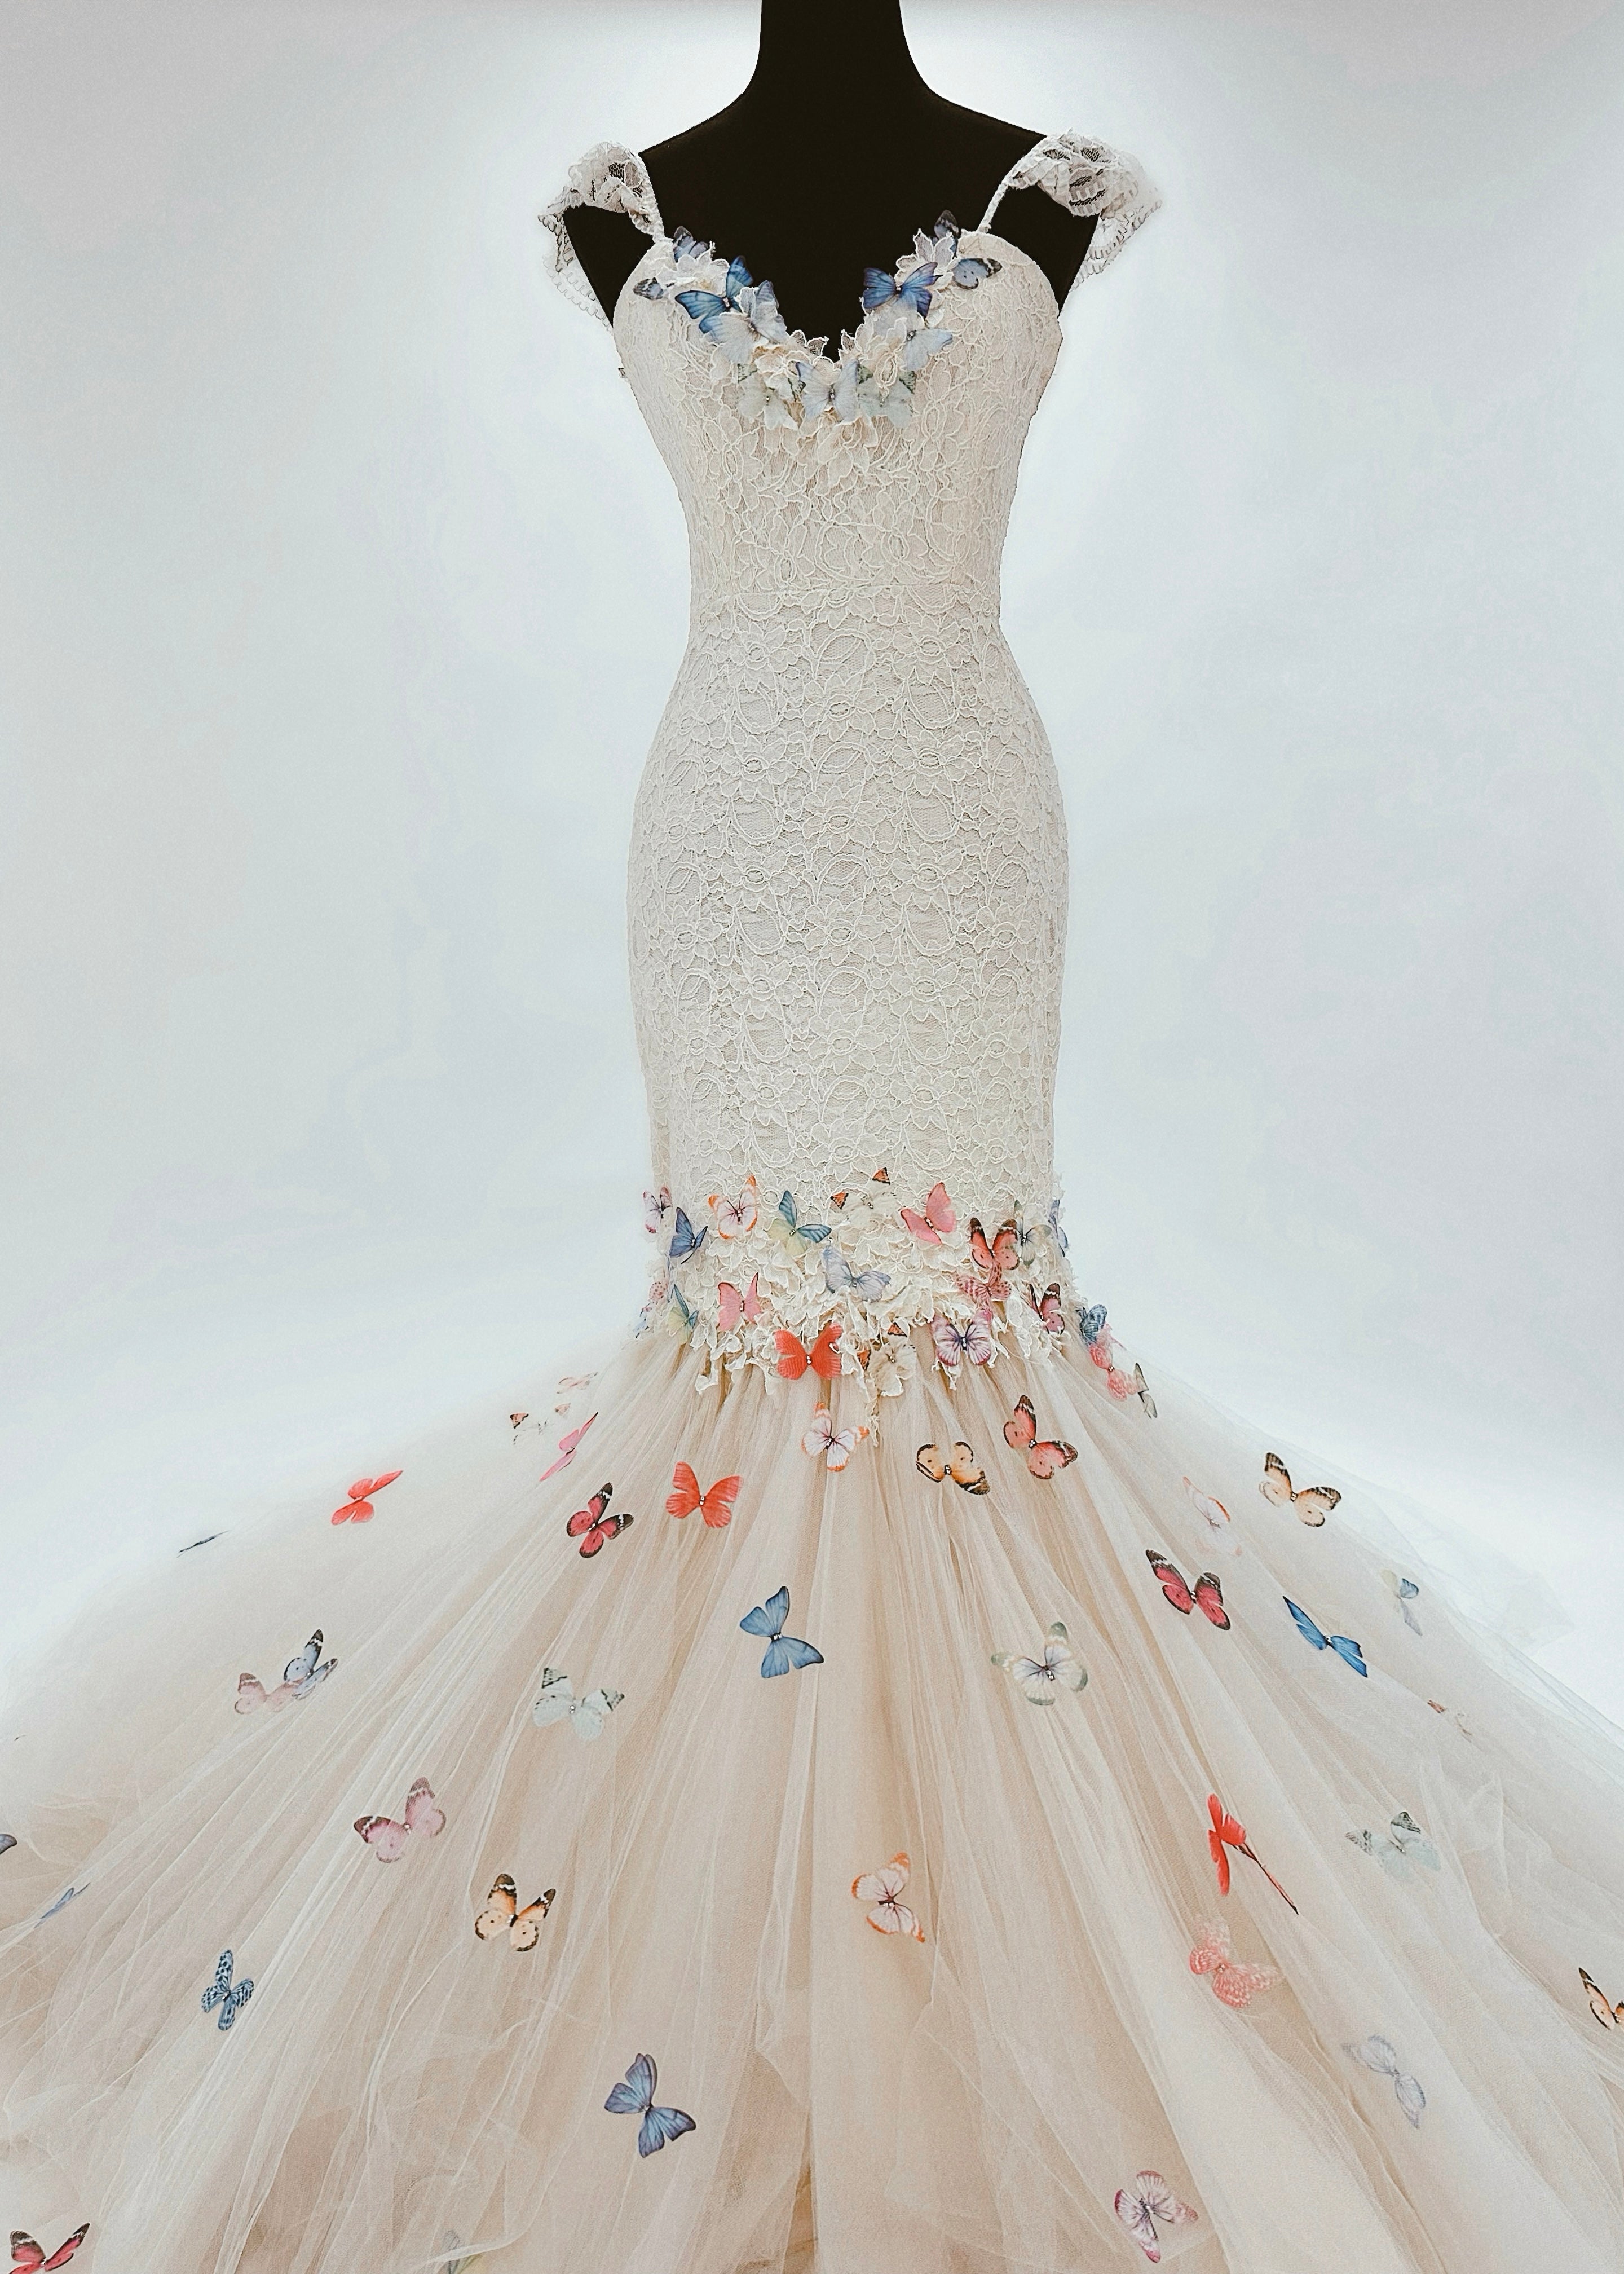 Colorful rainbow butterfly wedding dress with dramatic tulle skirt and train 